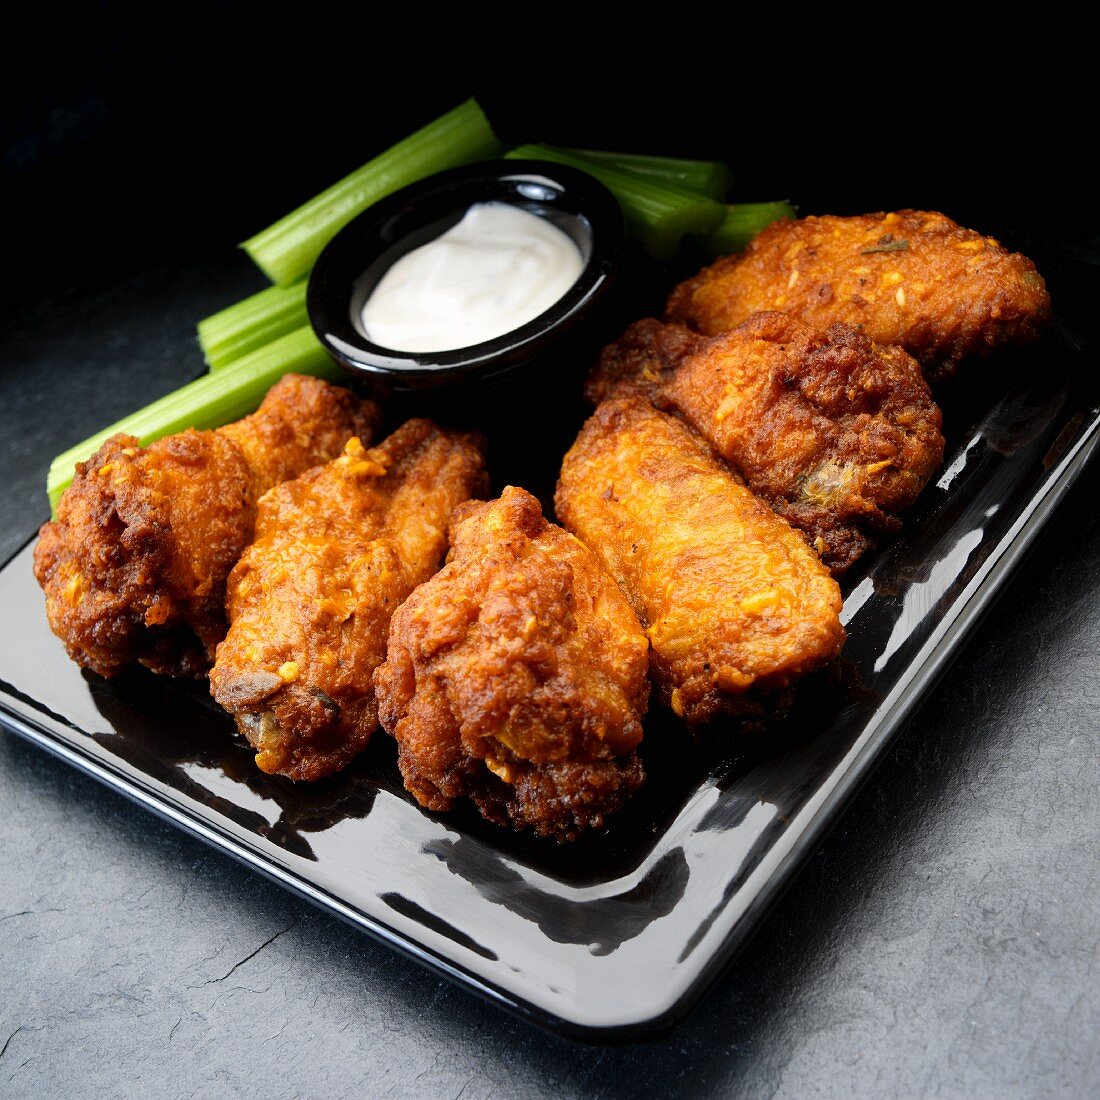 Buffalo chicken wings with garlic, celery and ranch dressing